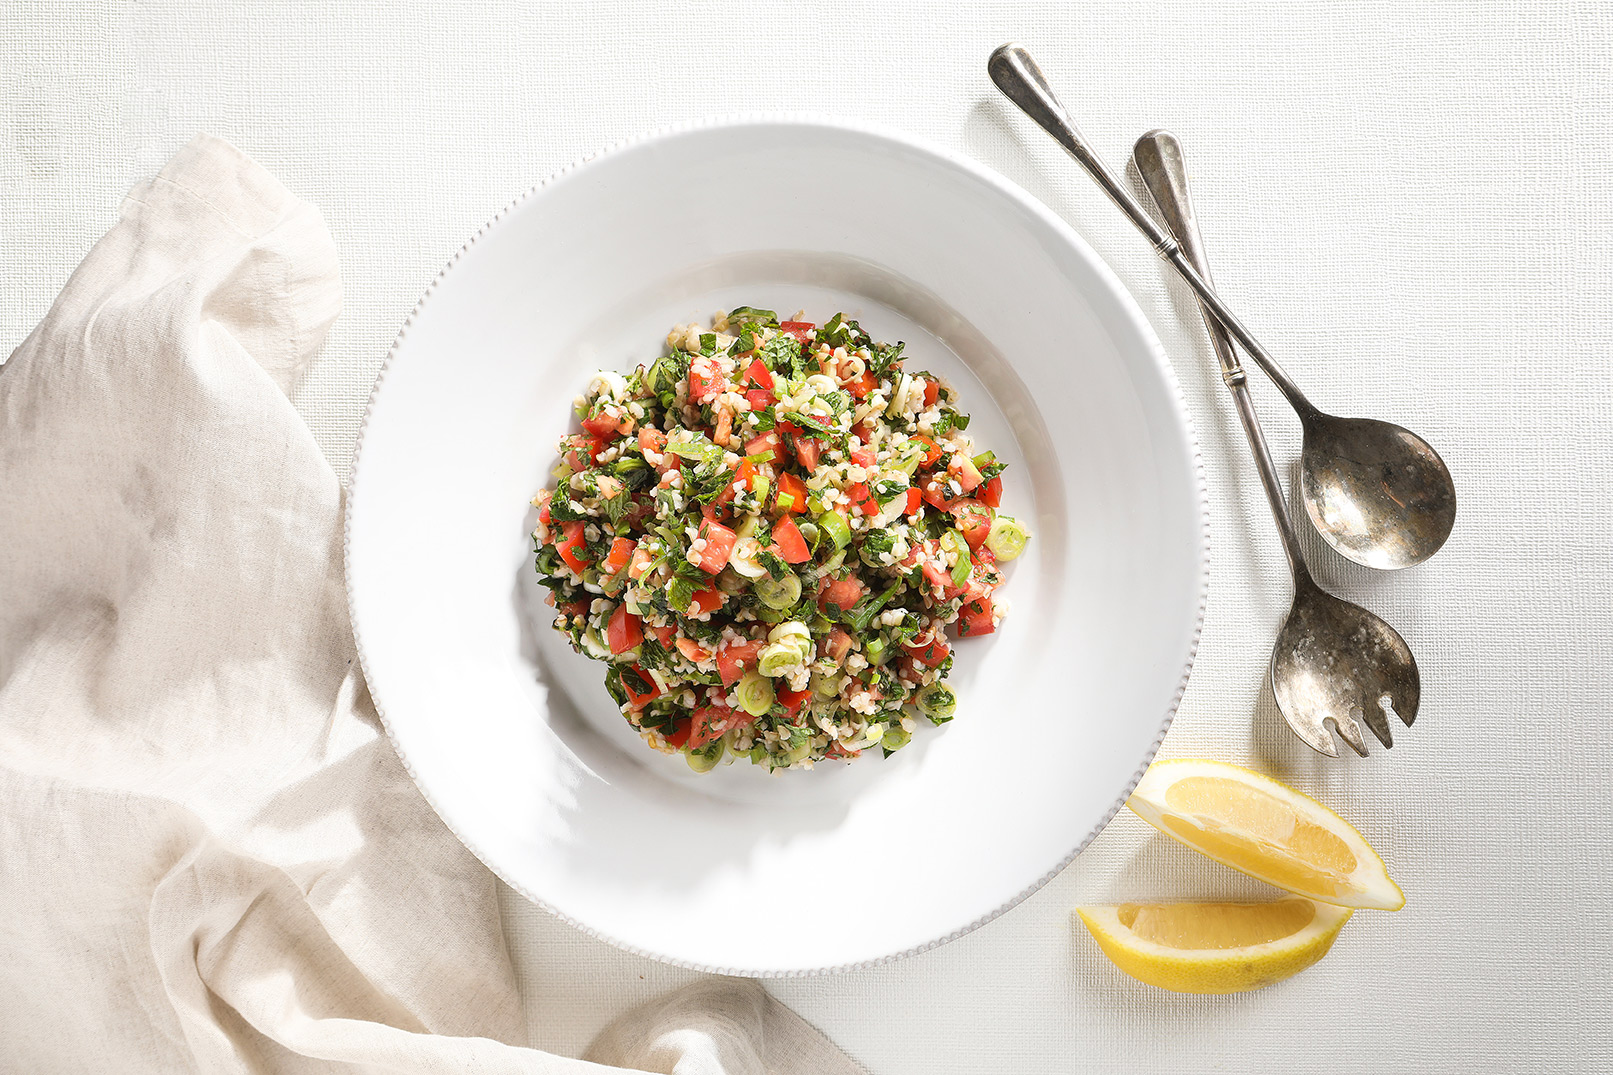 Image of tabouli on a white plate shot from above with lemon wedges and serving spoons.